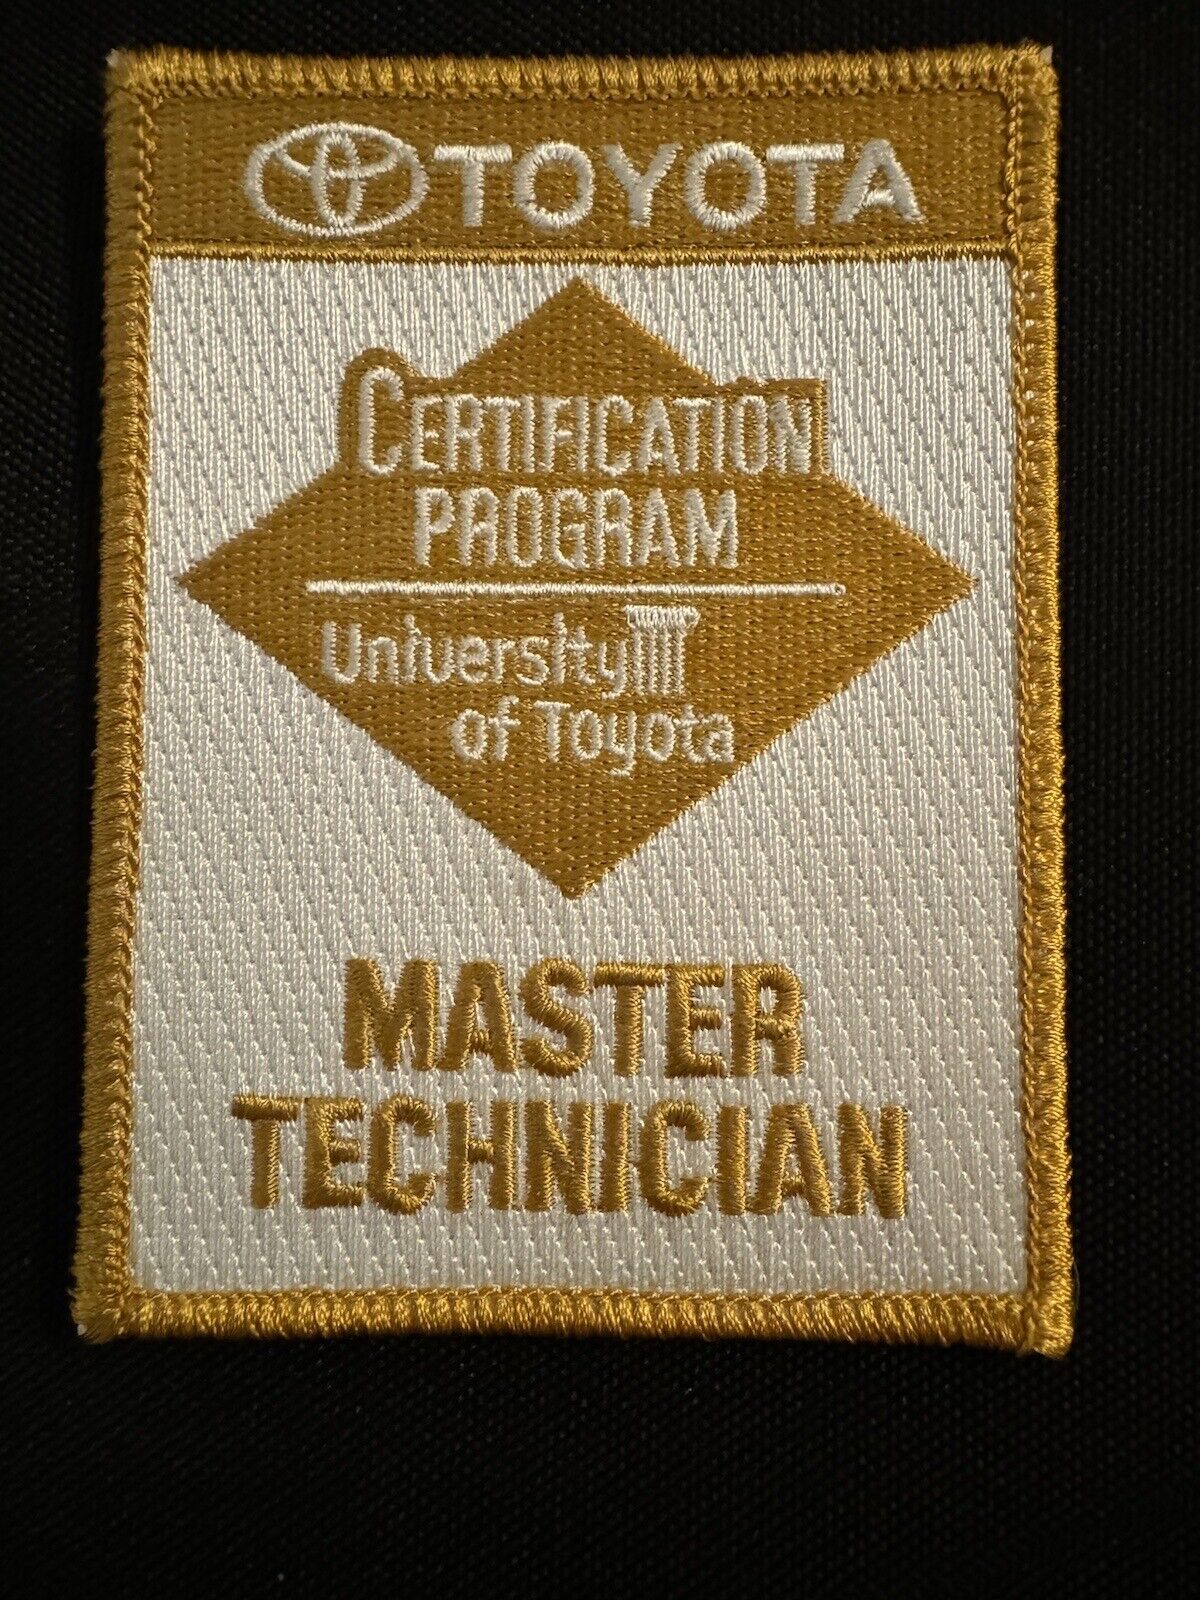 Toyota Master Technician Patch New 